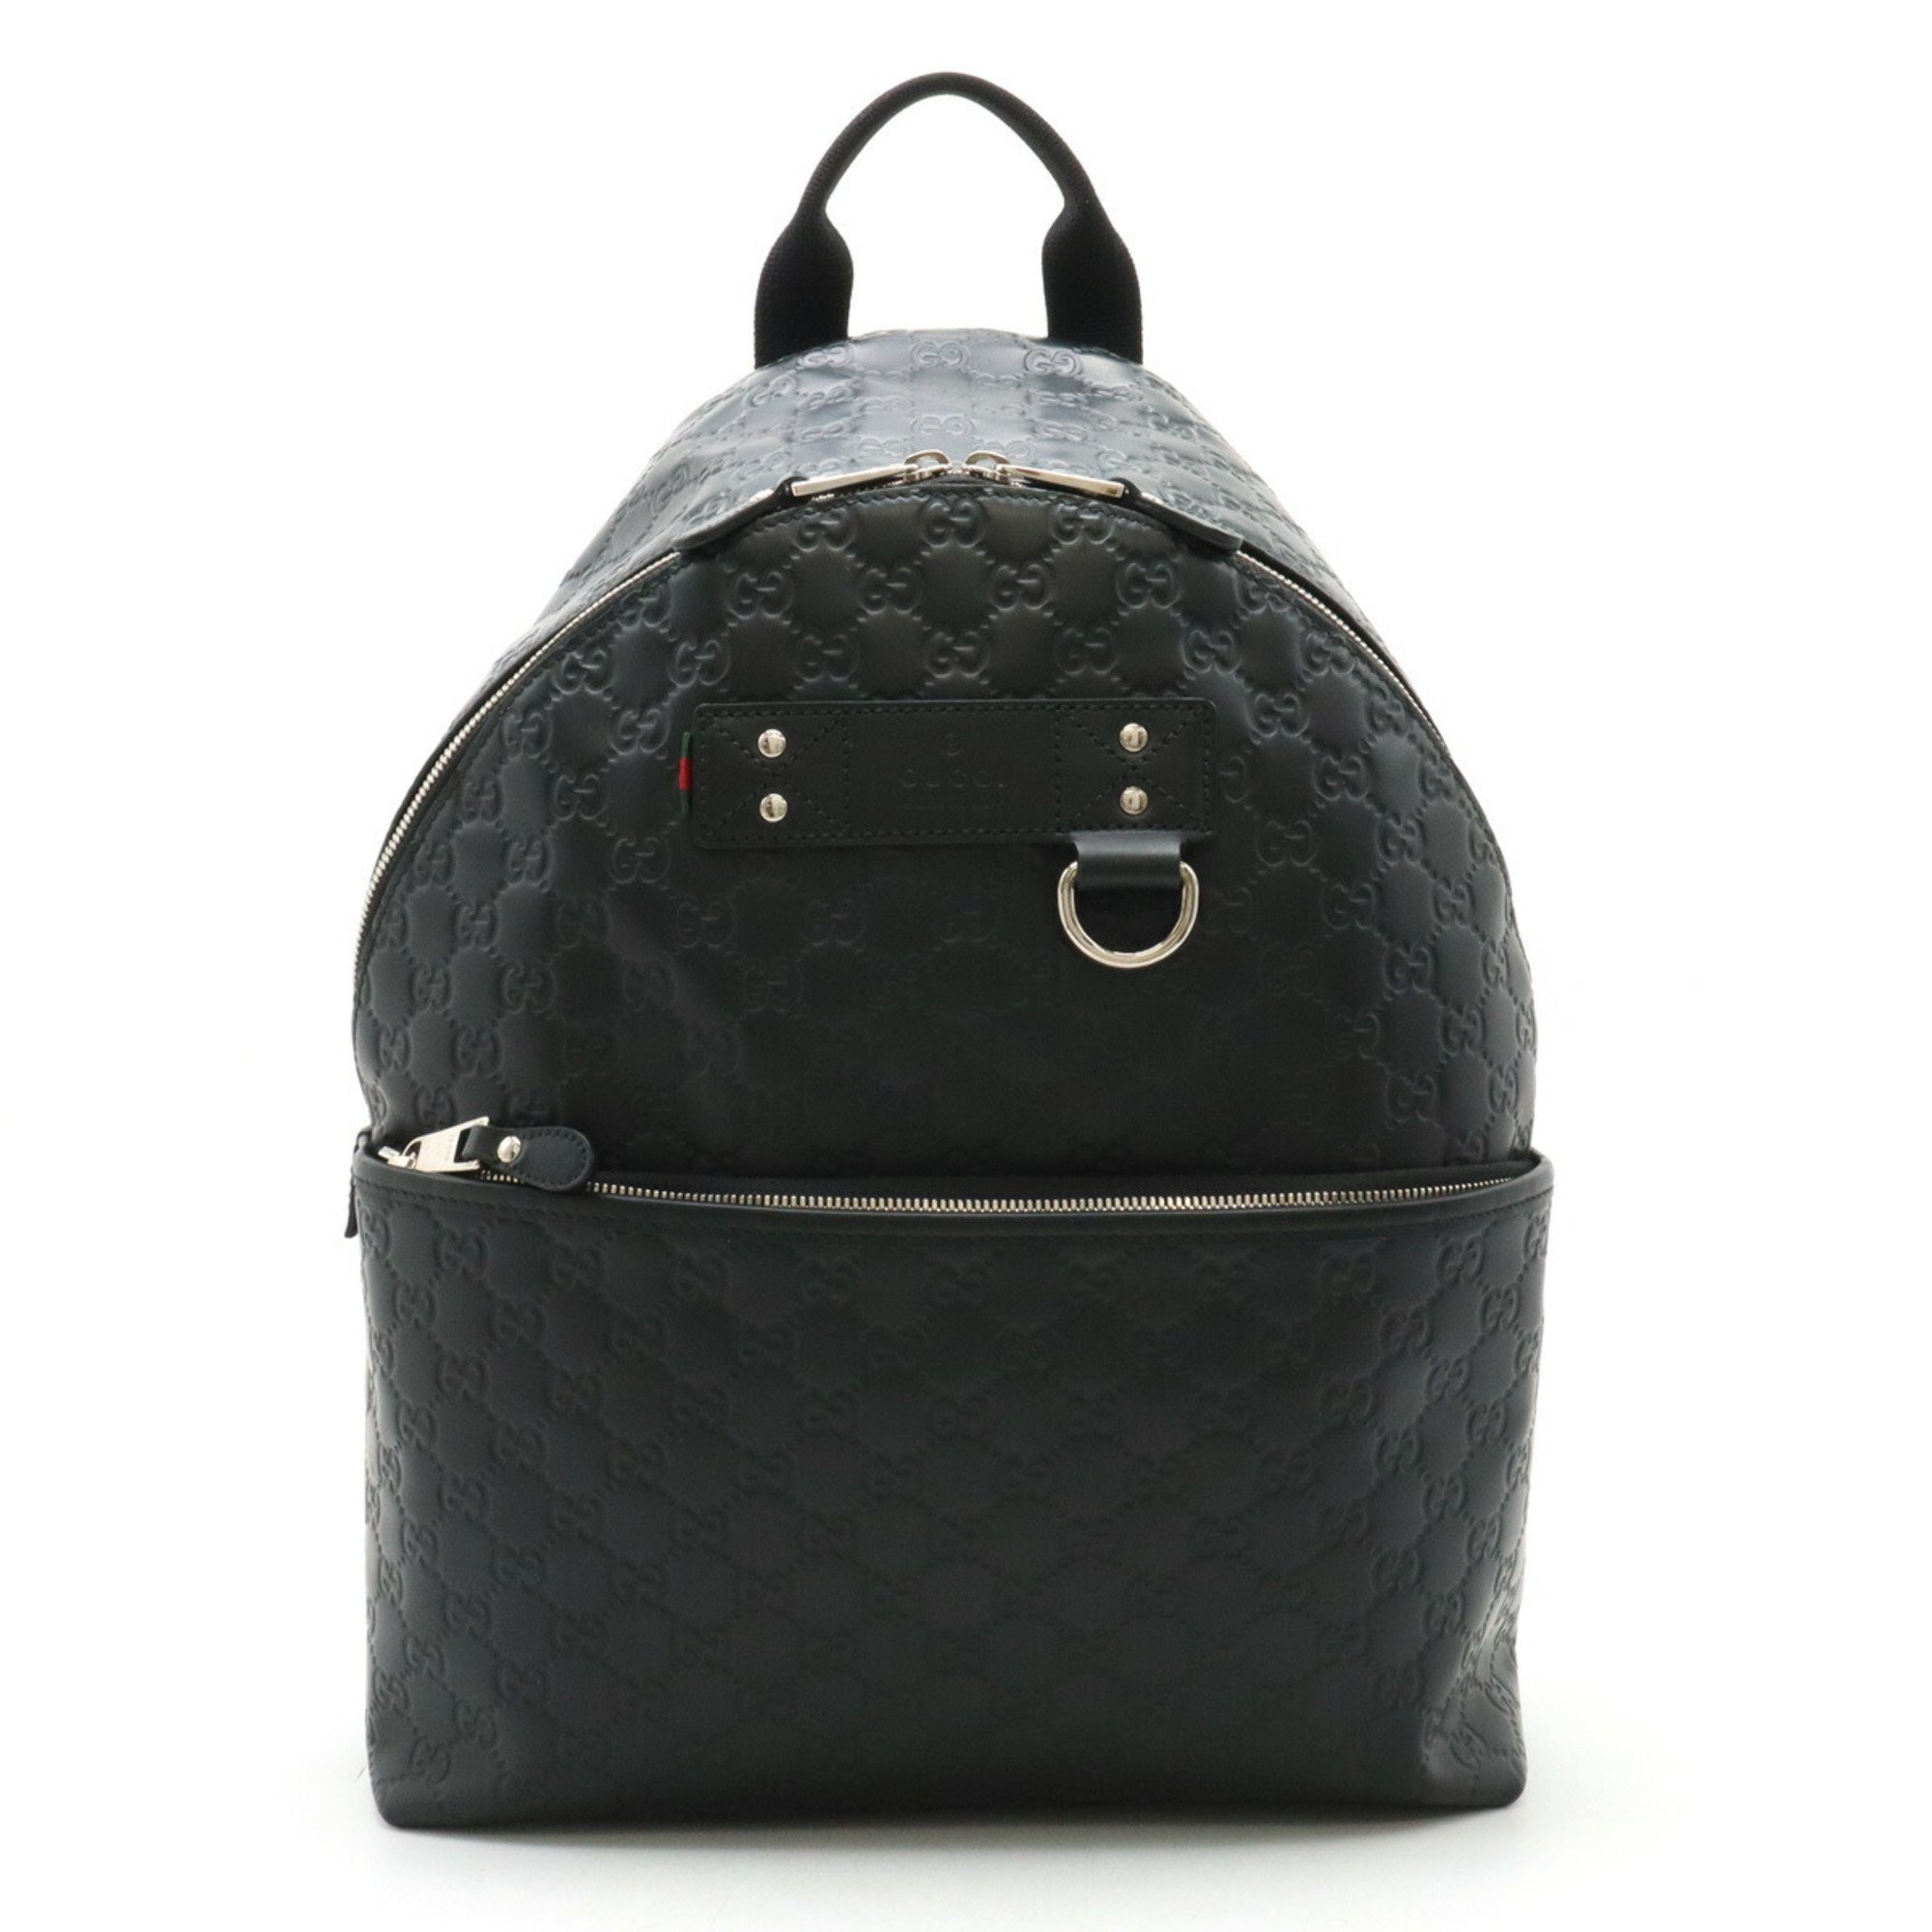 GUCCI Guccissima Rubber Backpack Rucksack Daypack Leather Black 268184